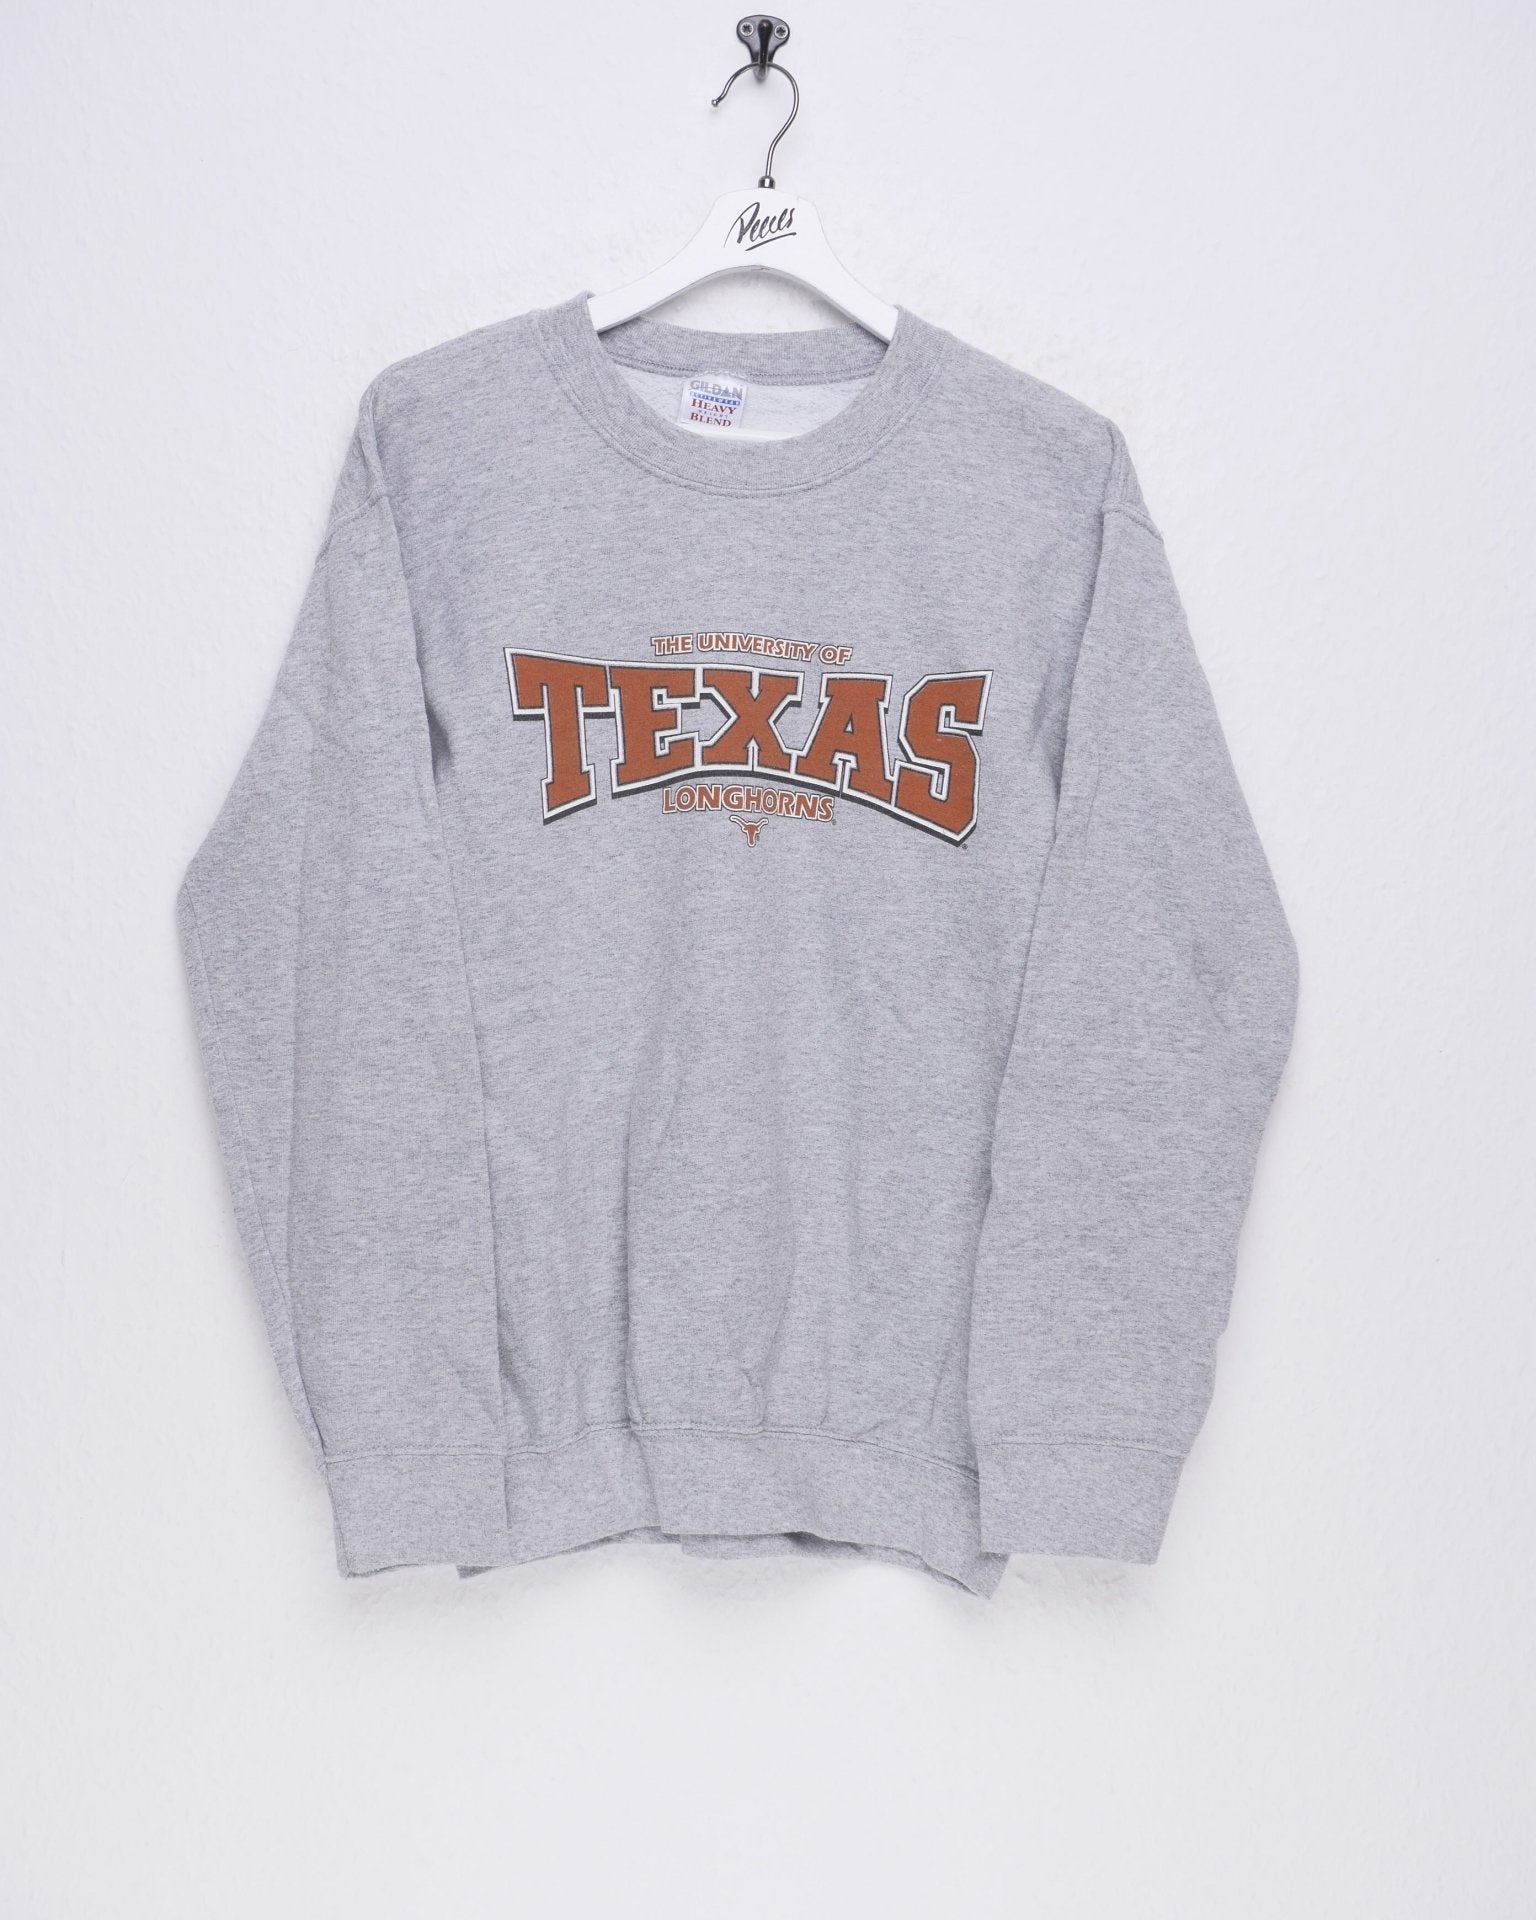 University of Texas printed Spellout Vintage Sweater - Peeces